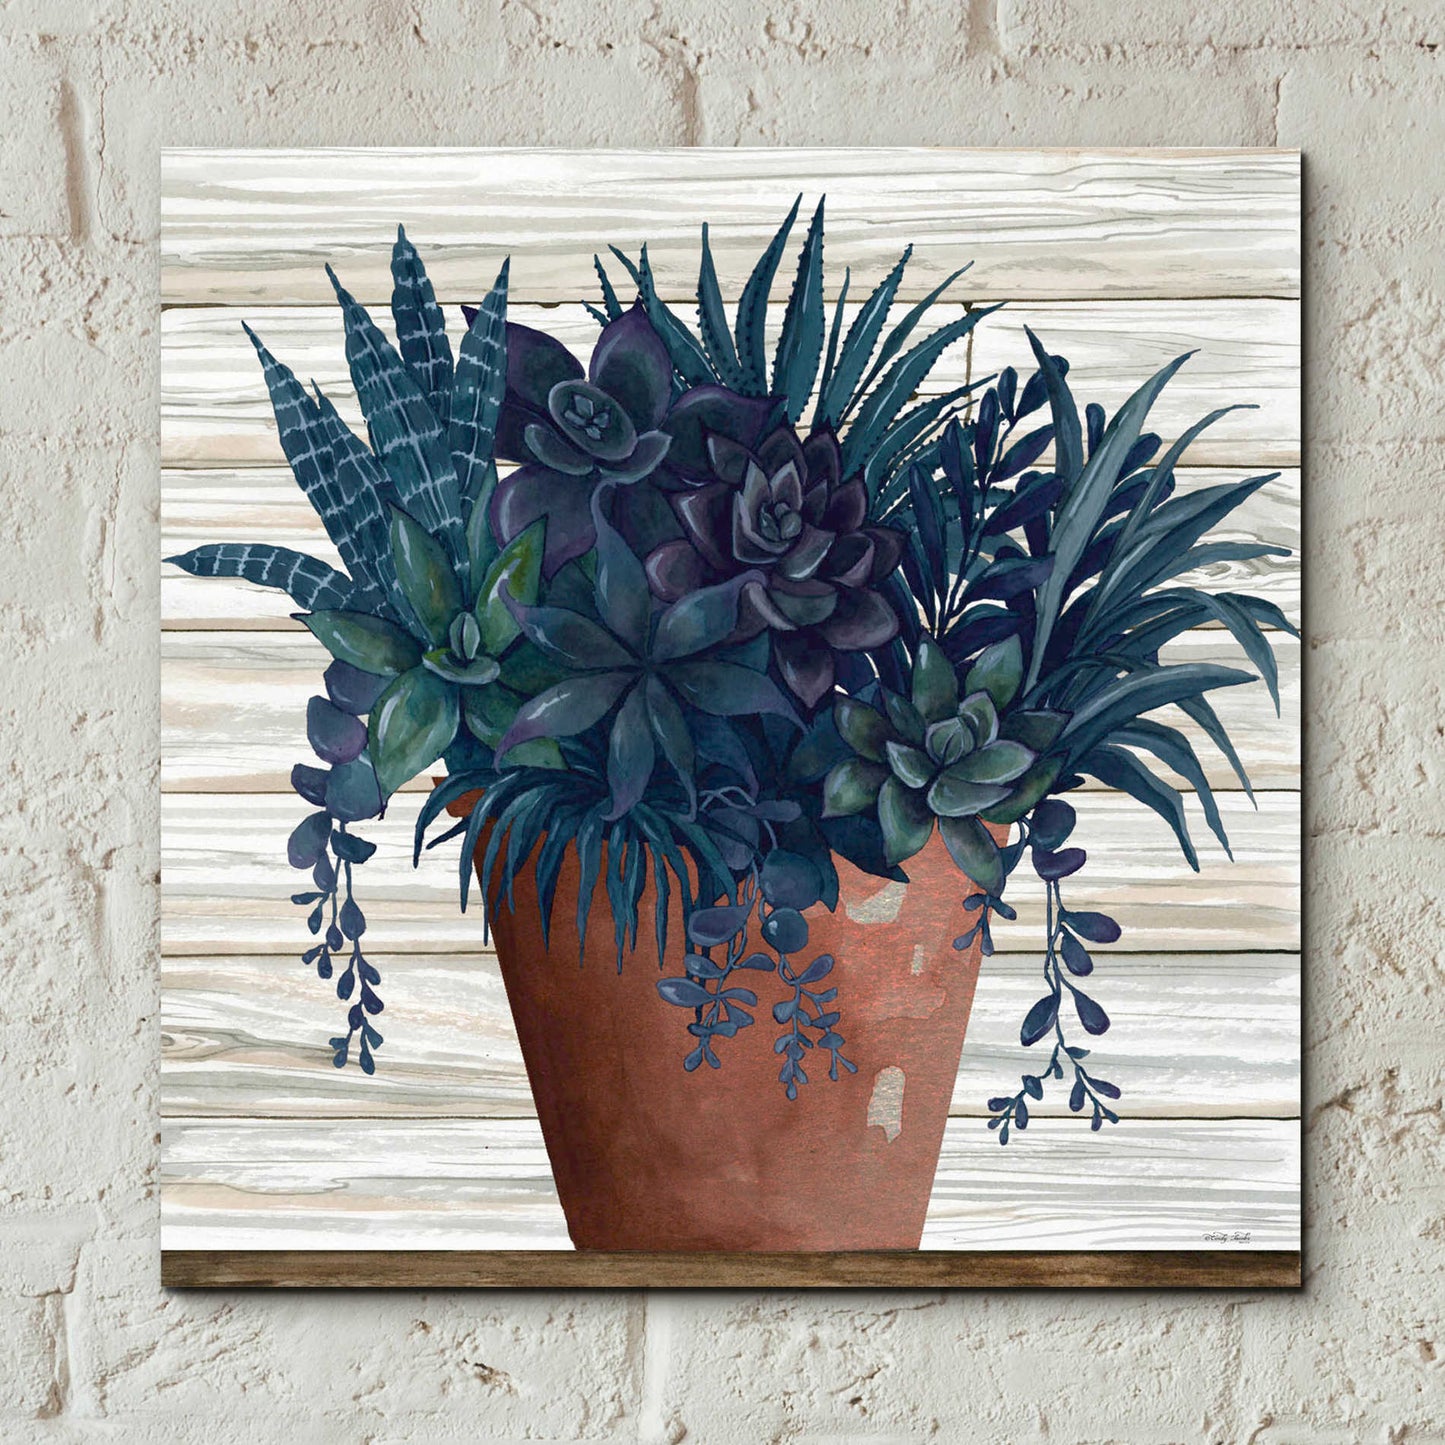 Epic Art 'Remarkable Succulents II' by Cindy Jacobs, Acrylic Glass Wall Art,12x12